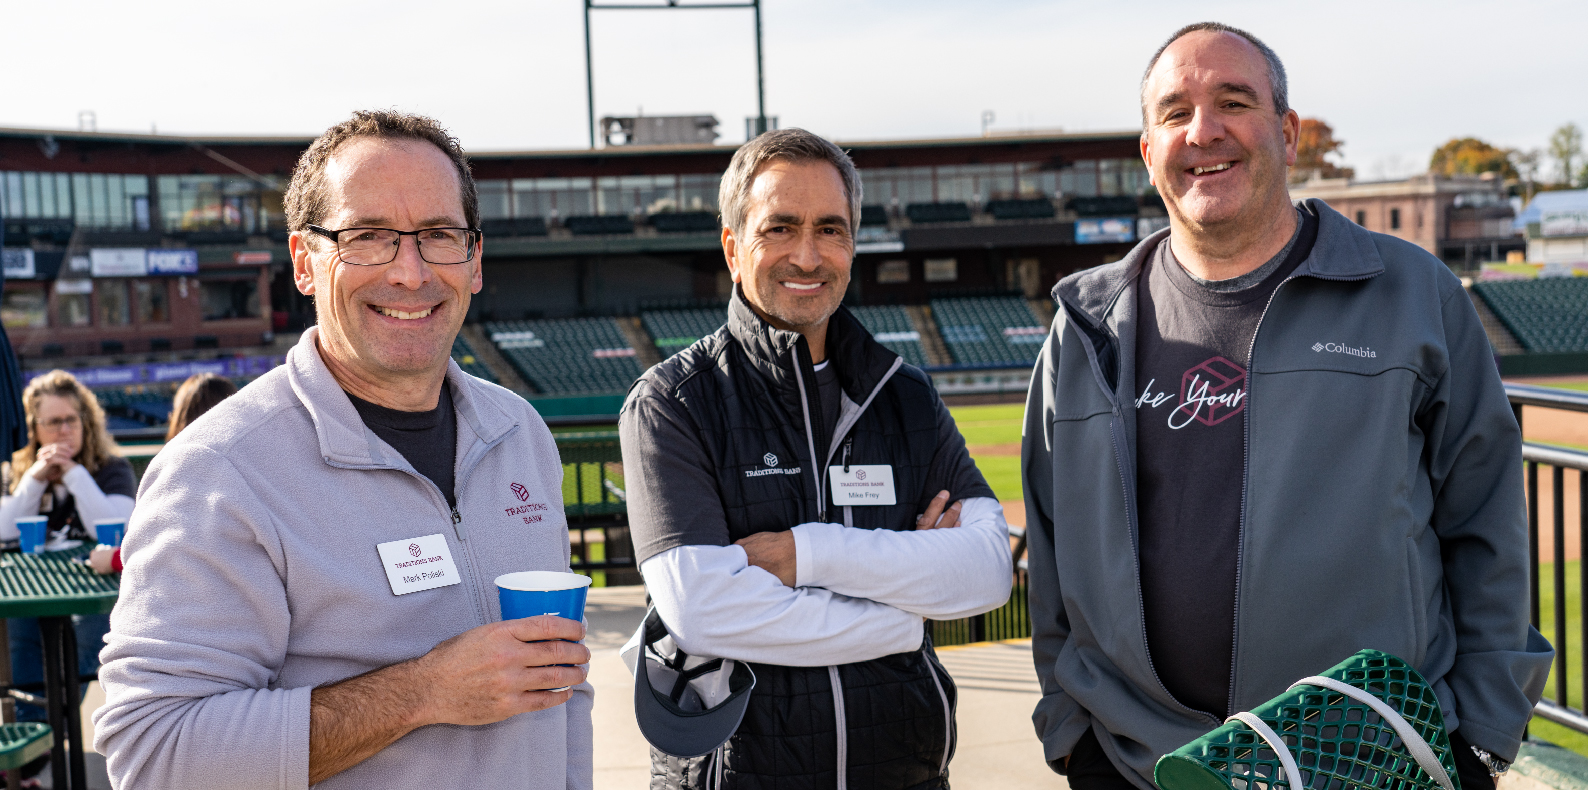 three men standing together smiling at an event in a baseball stadium